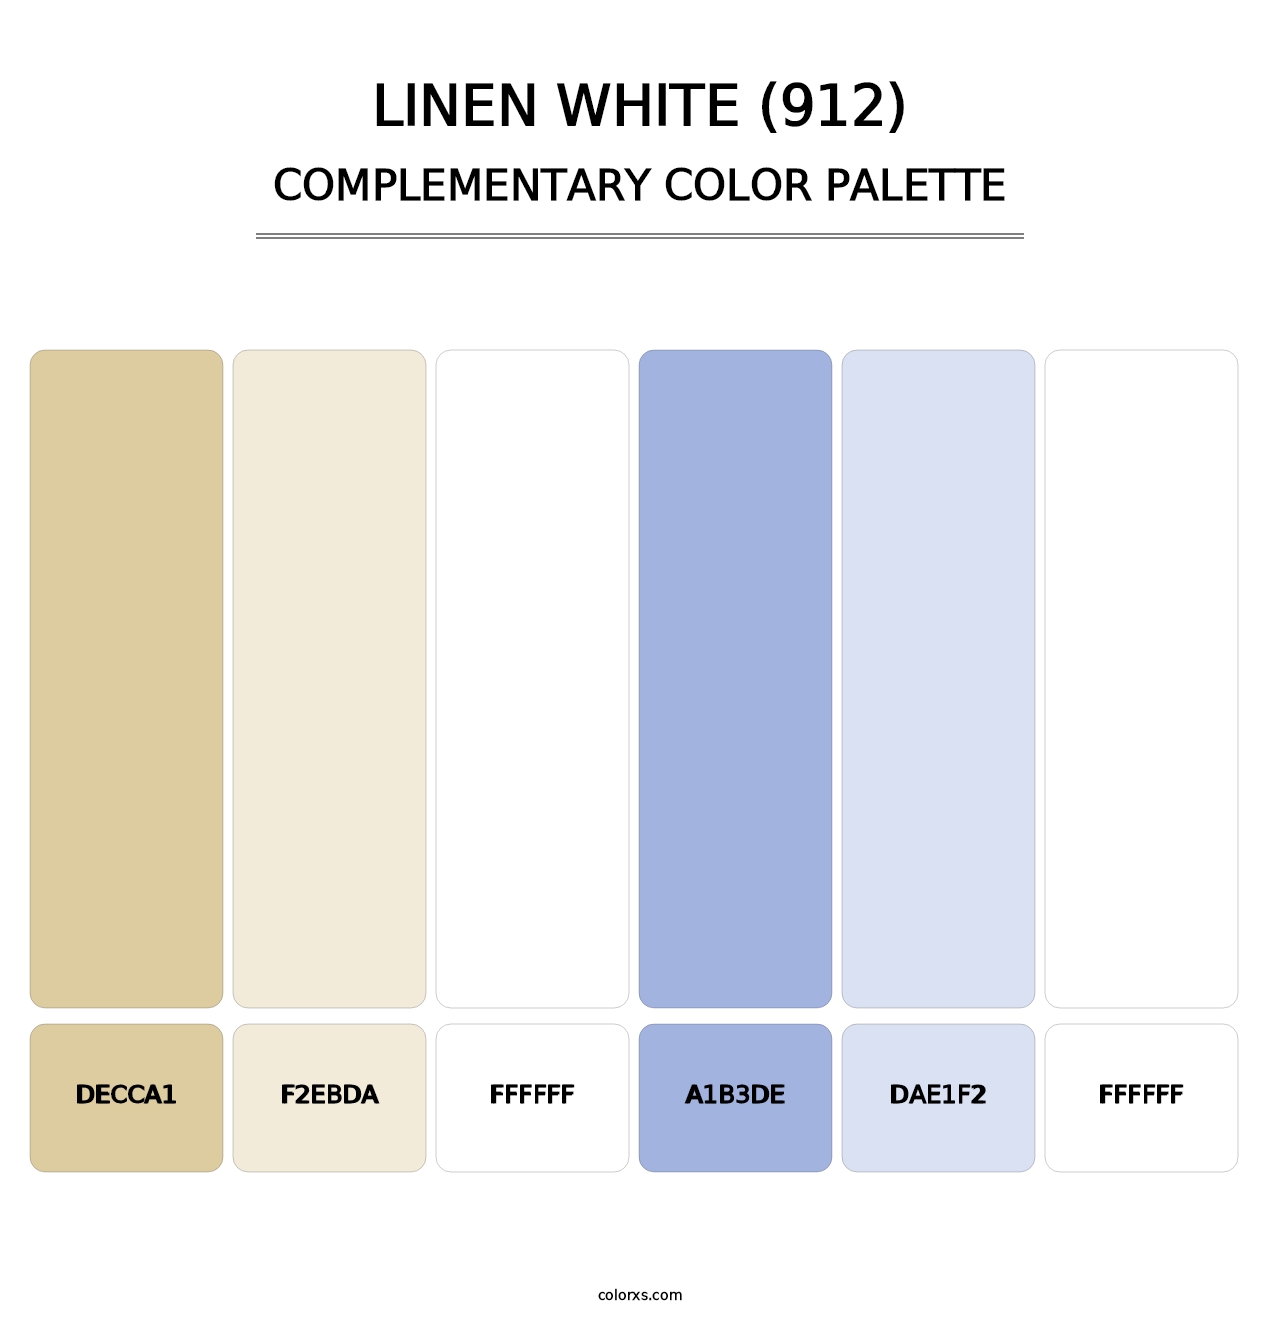 Linen White (912) - Complementary Color Palette